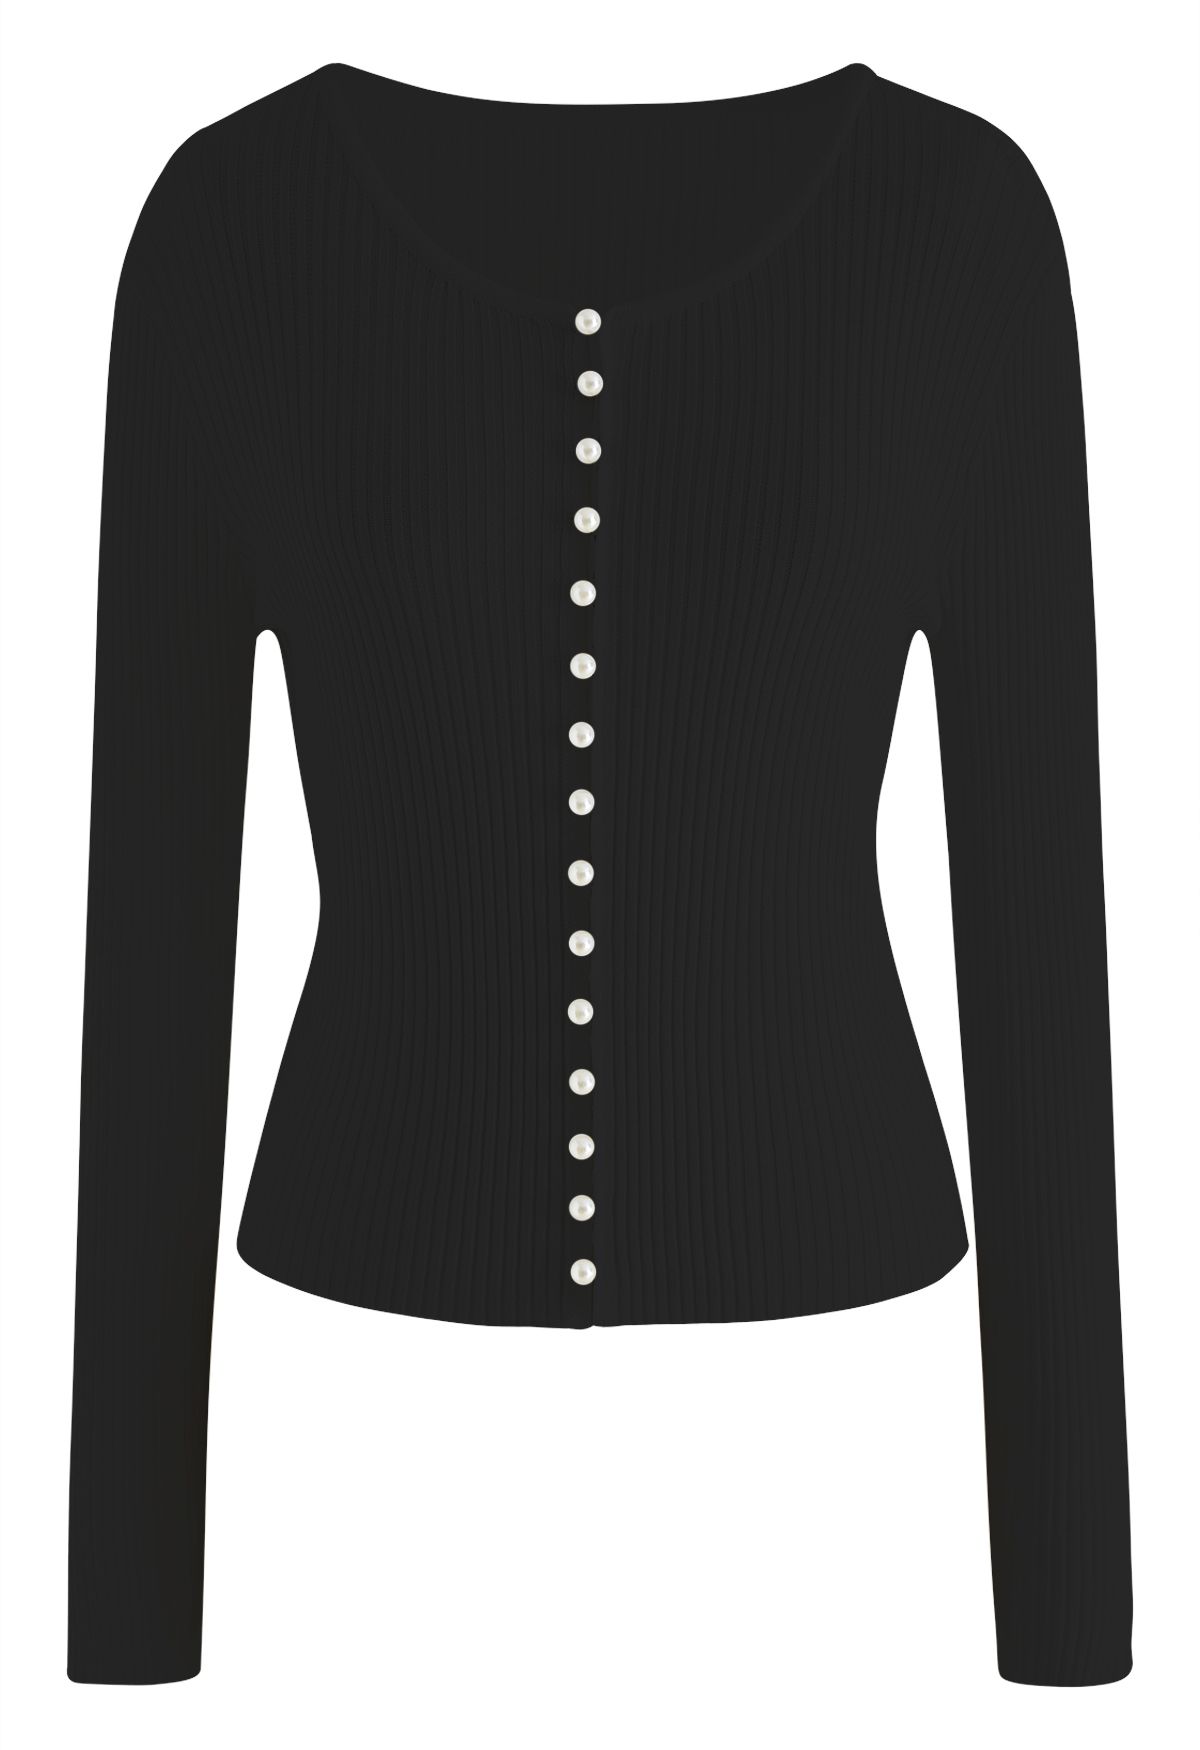 Sund og rask klodset fajance Decorative Pearls Ribbed Knit Top in Black - Retro, Indie and Unique Fashion